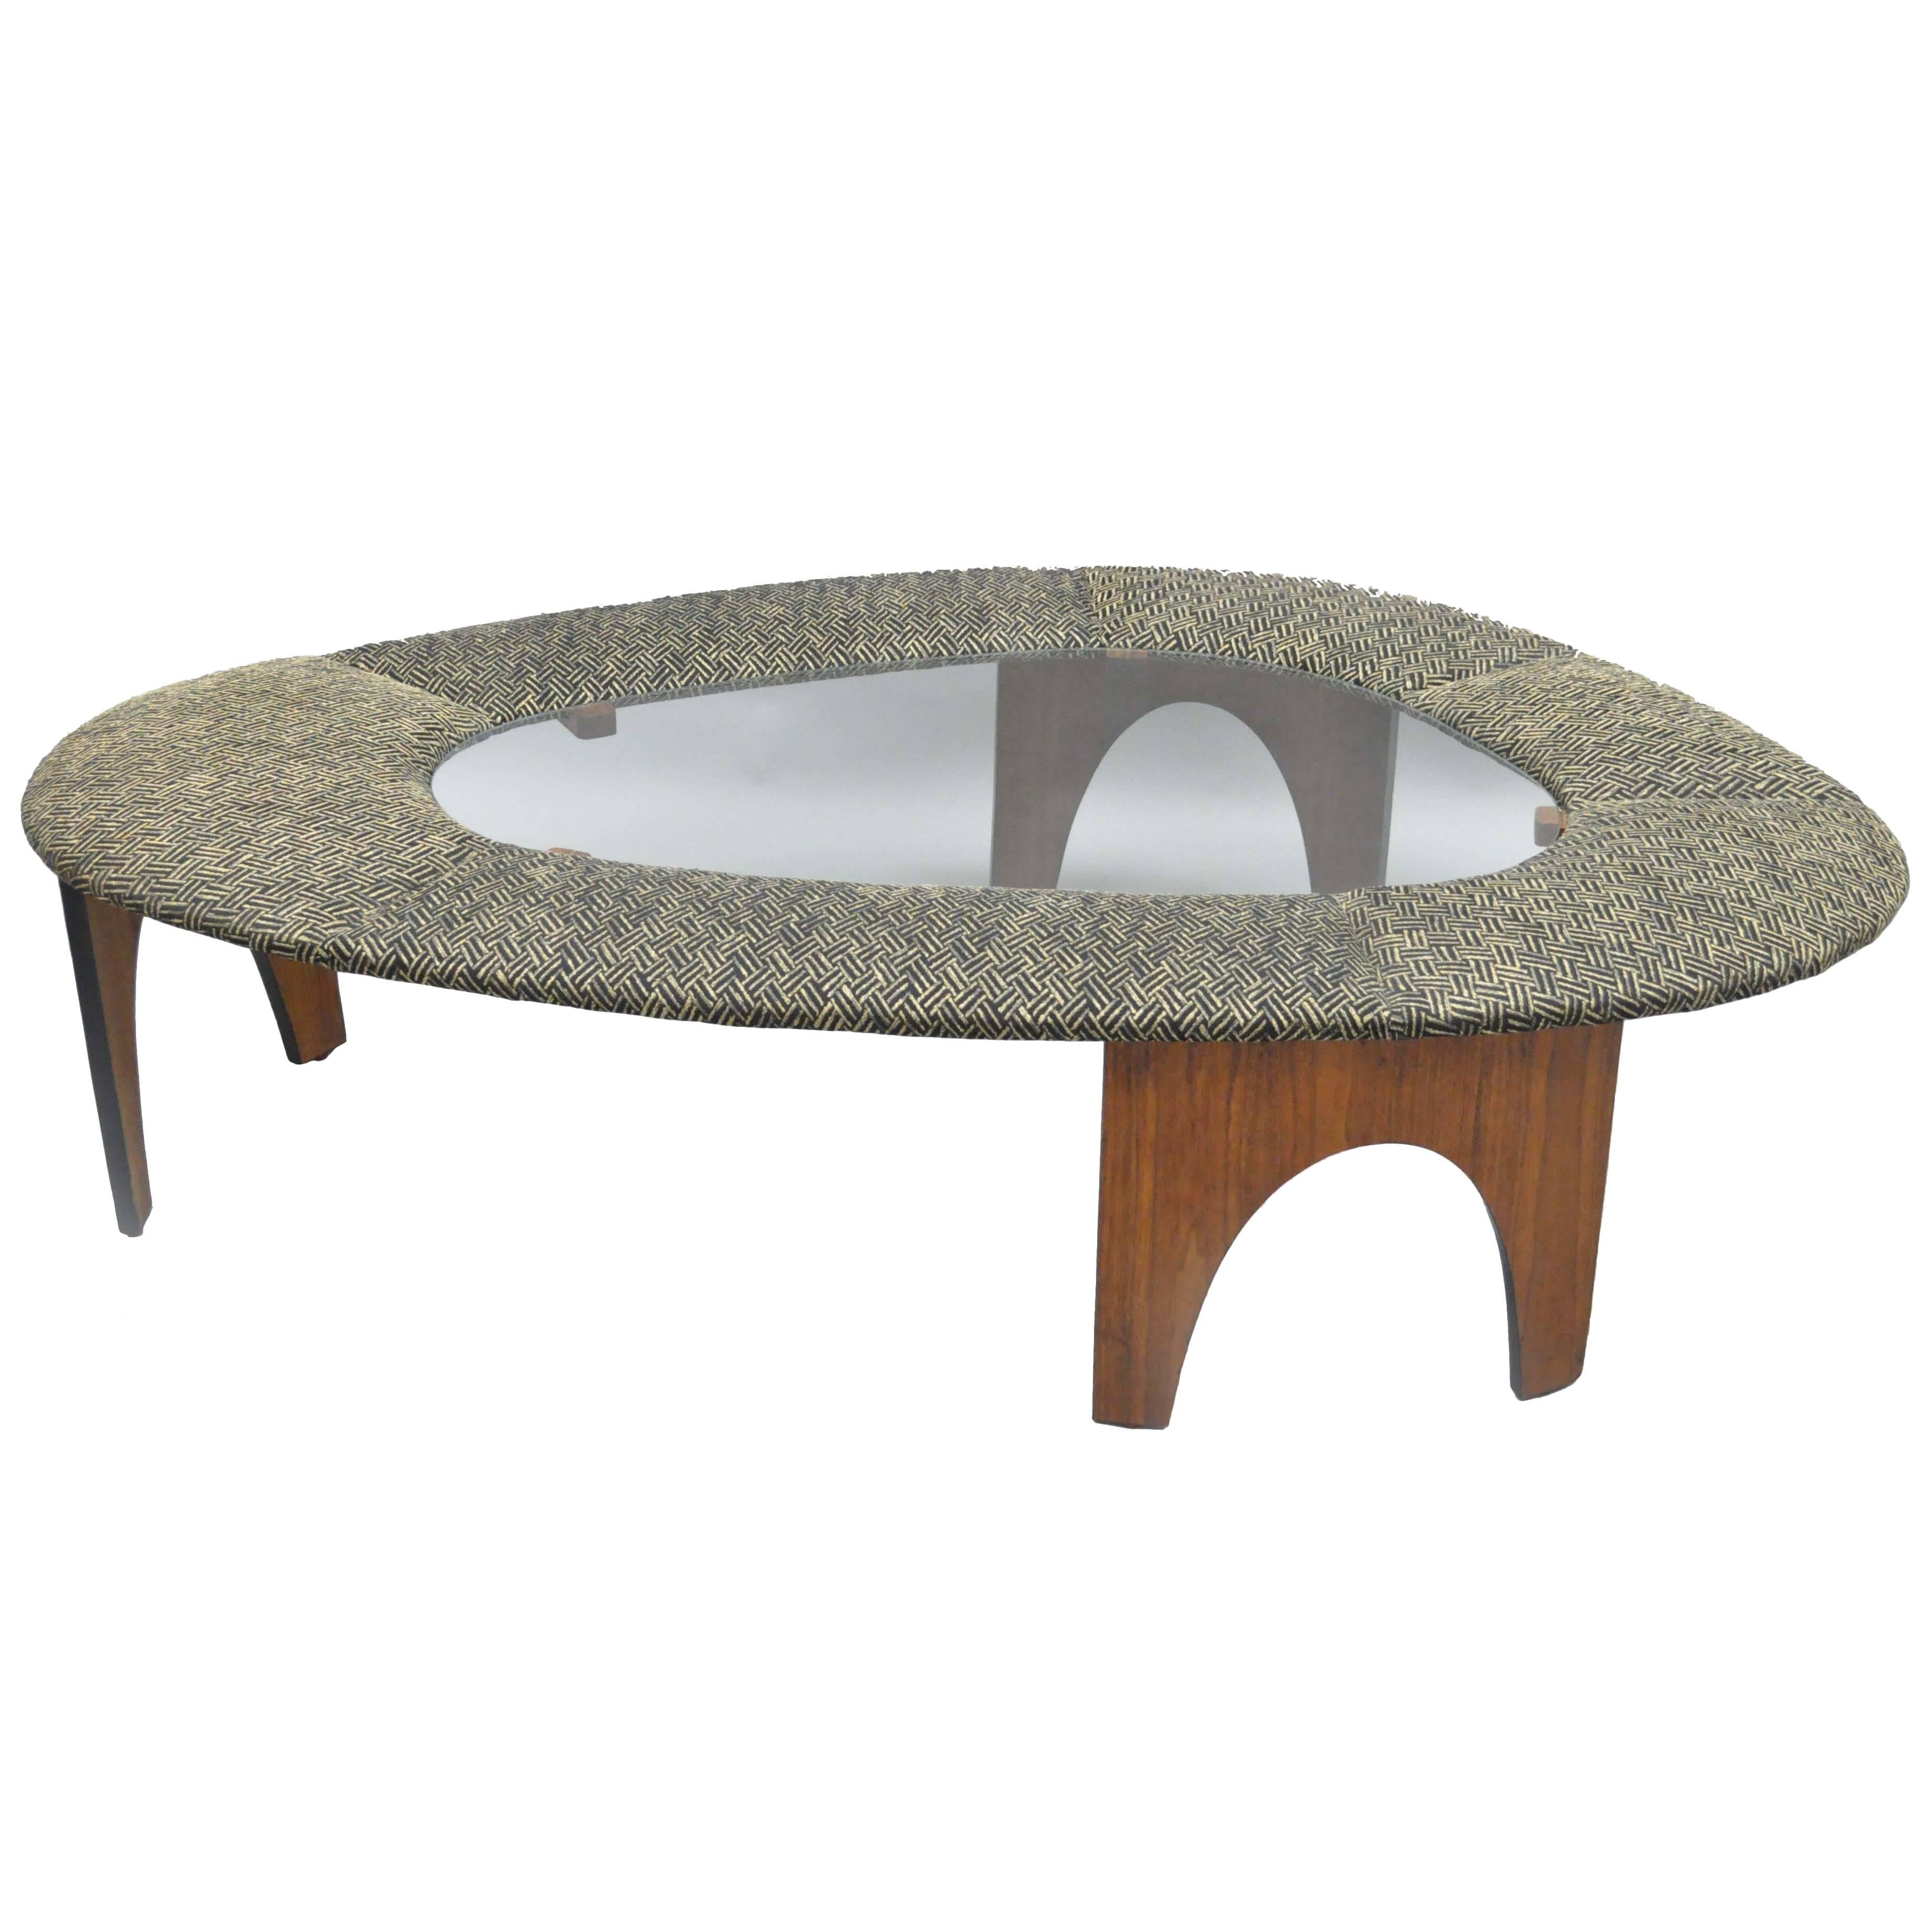 Henry P Glass Intimate Island Suite Walnut Upholstered Mid Century Coffee Table For Sale